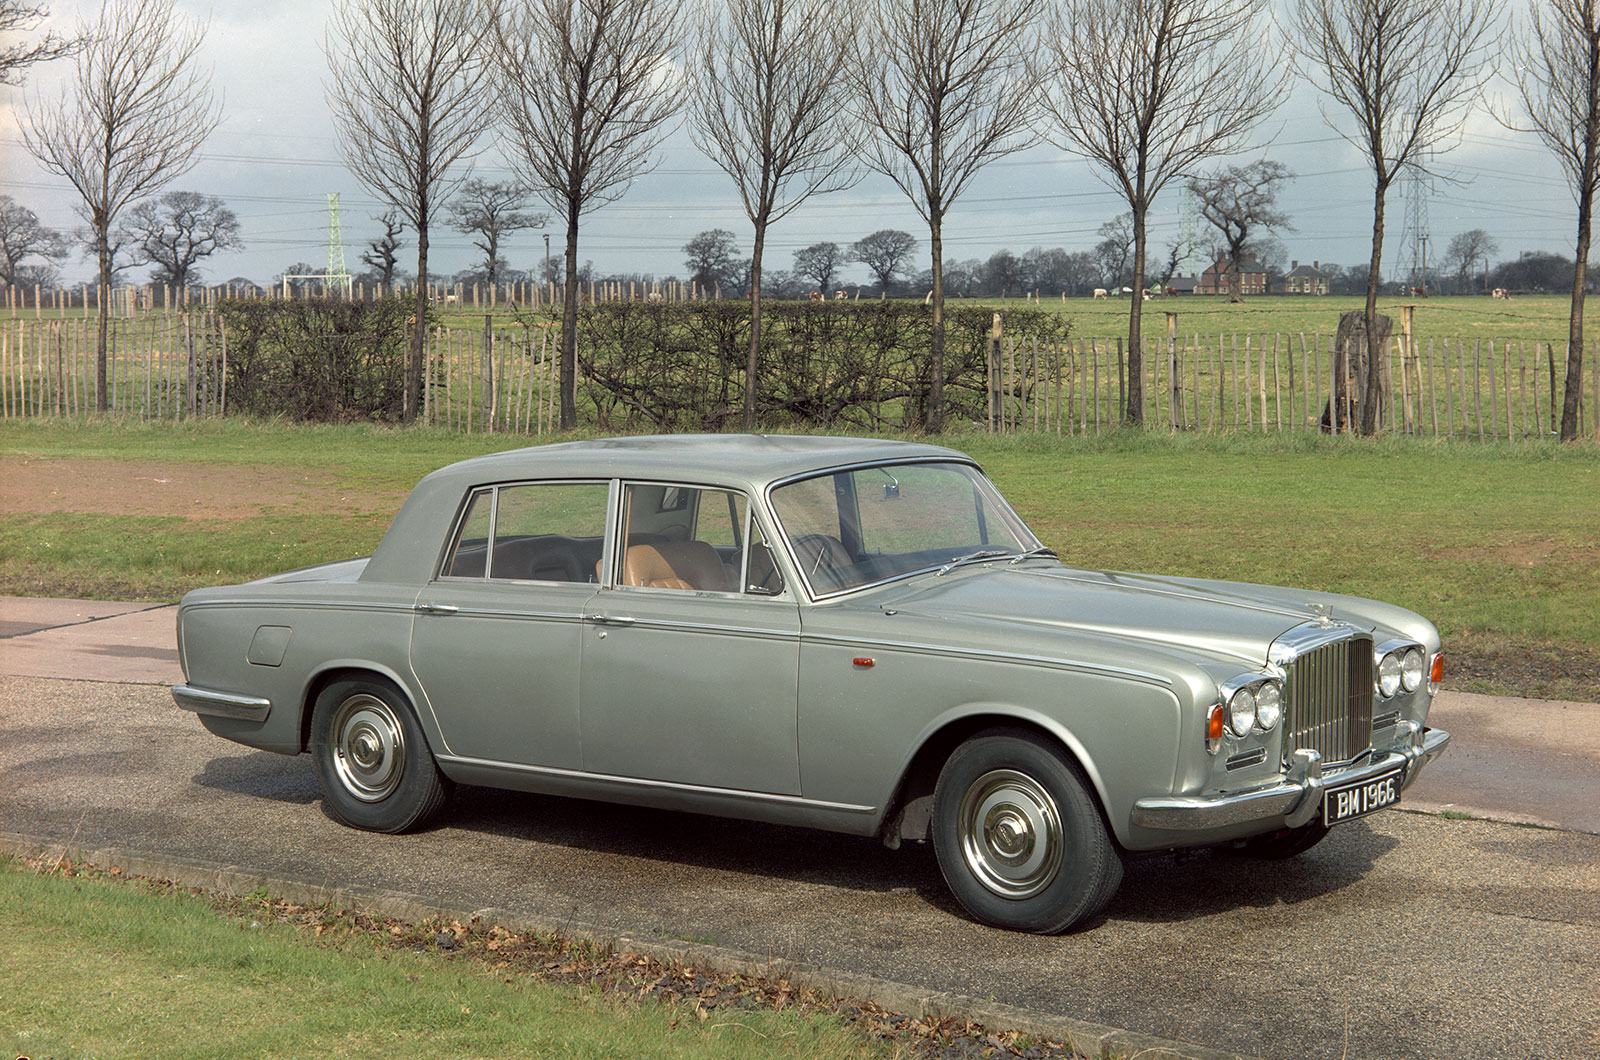 <p><span>A decade of intensive development and a redesigned production line at Crewe in 1965 produced the <strong>Bentley T-Series</strong>, which was nothing more than a rebadged Rolls-Royce <strong>Silver Shadow</strong>. With independent suspension, four-wheel disc brakes and air-conditioning, like the Silver Shadow for Rolls-Royce, the T-Series was the first Bentley to feature <strong>monocoque construction</strong>.</span></p>